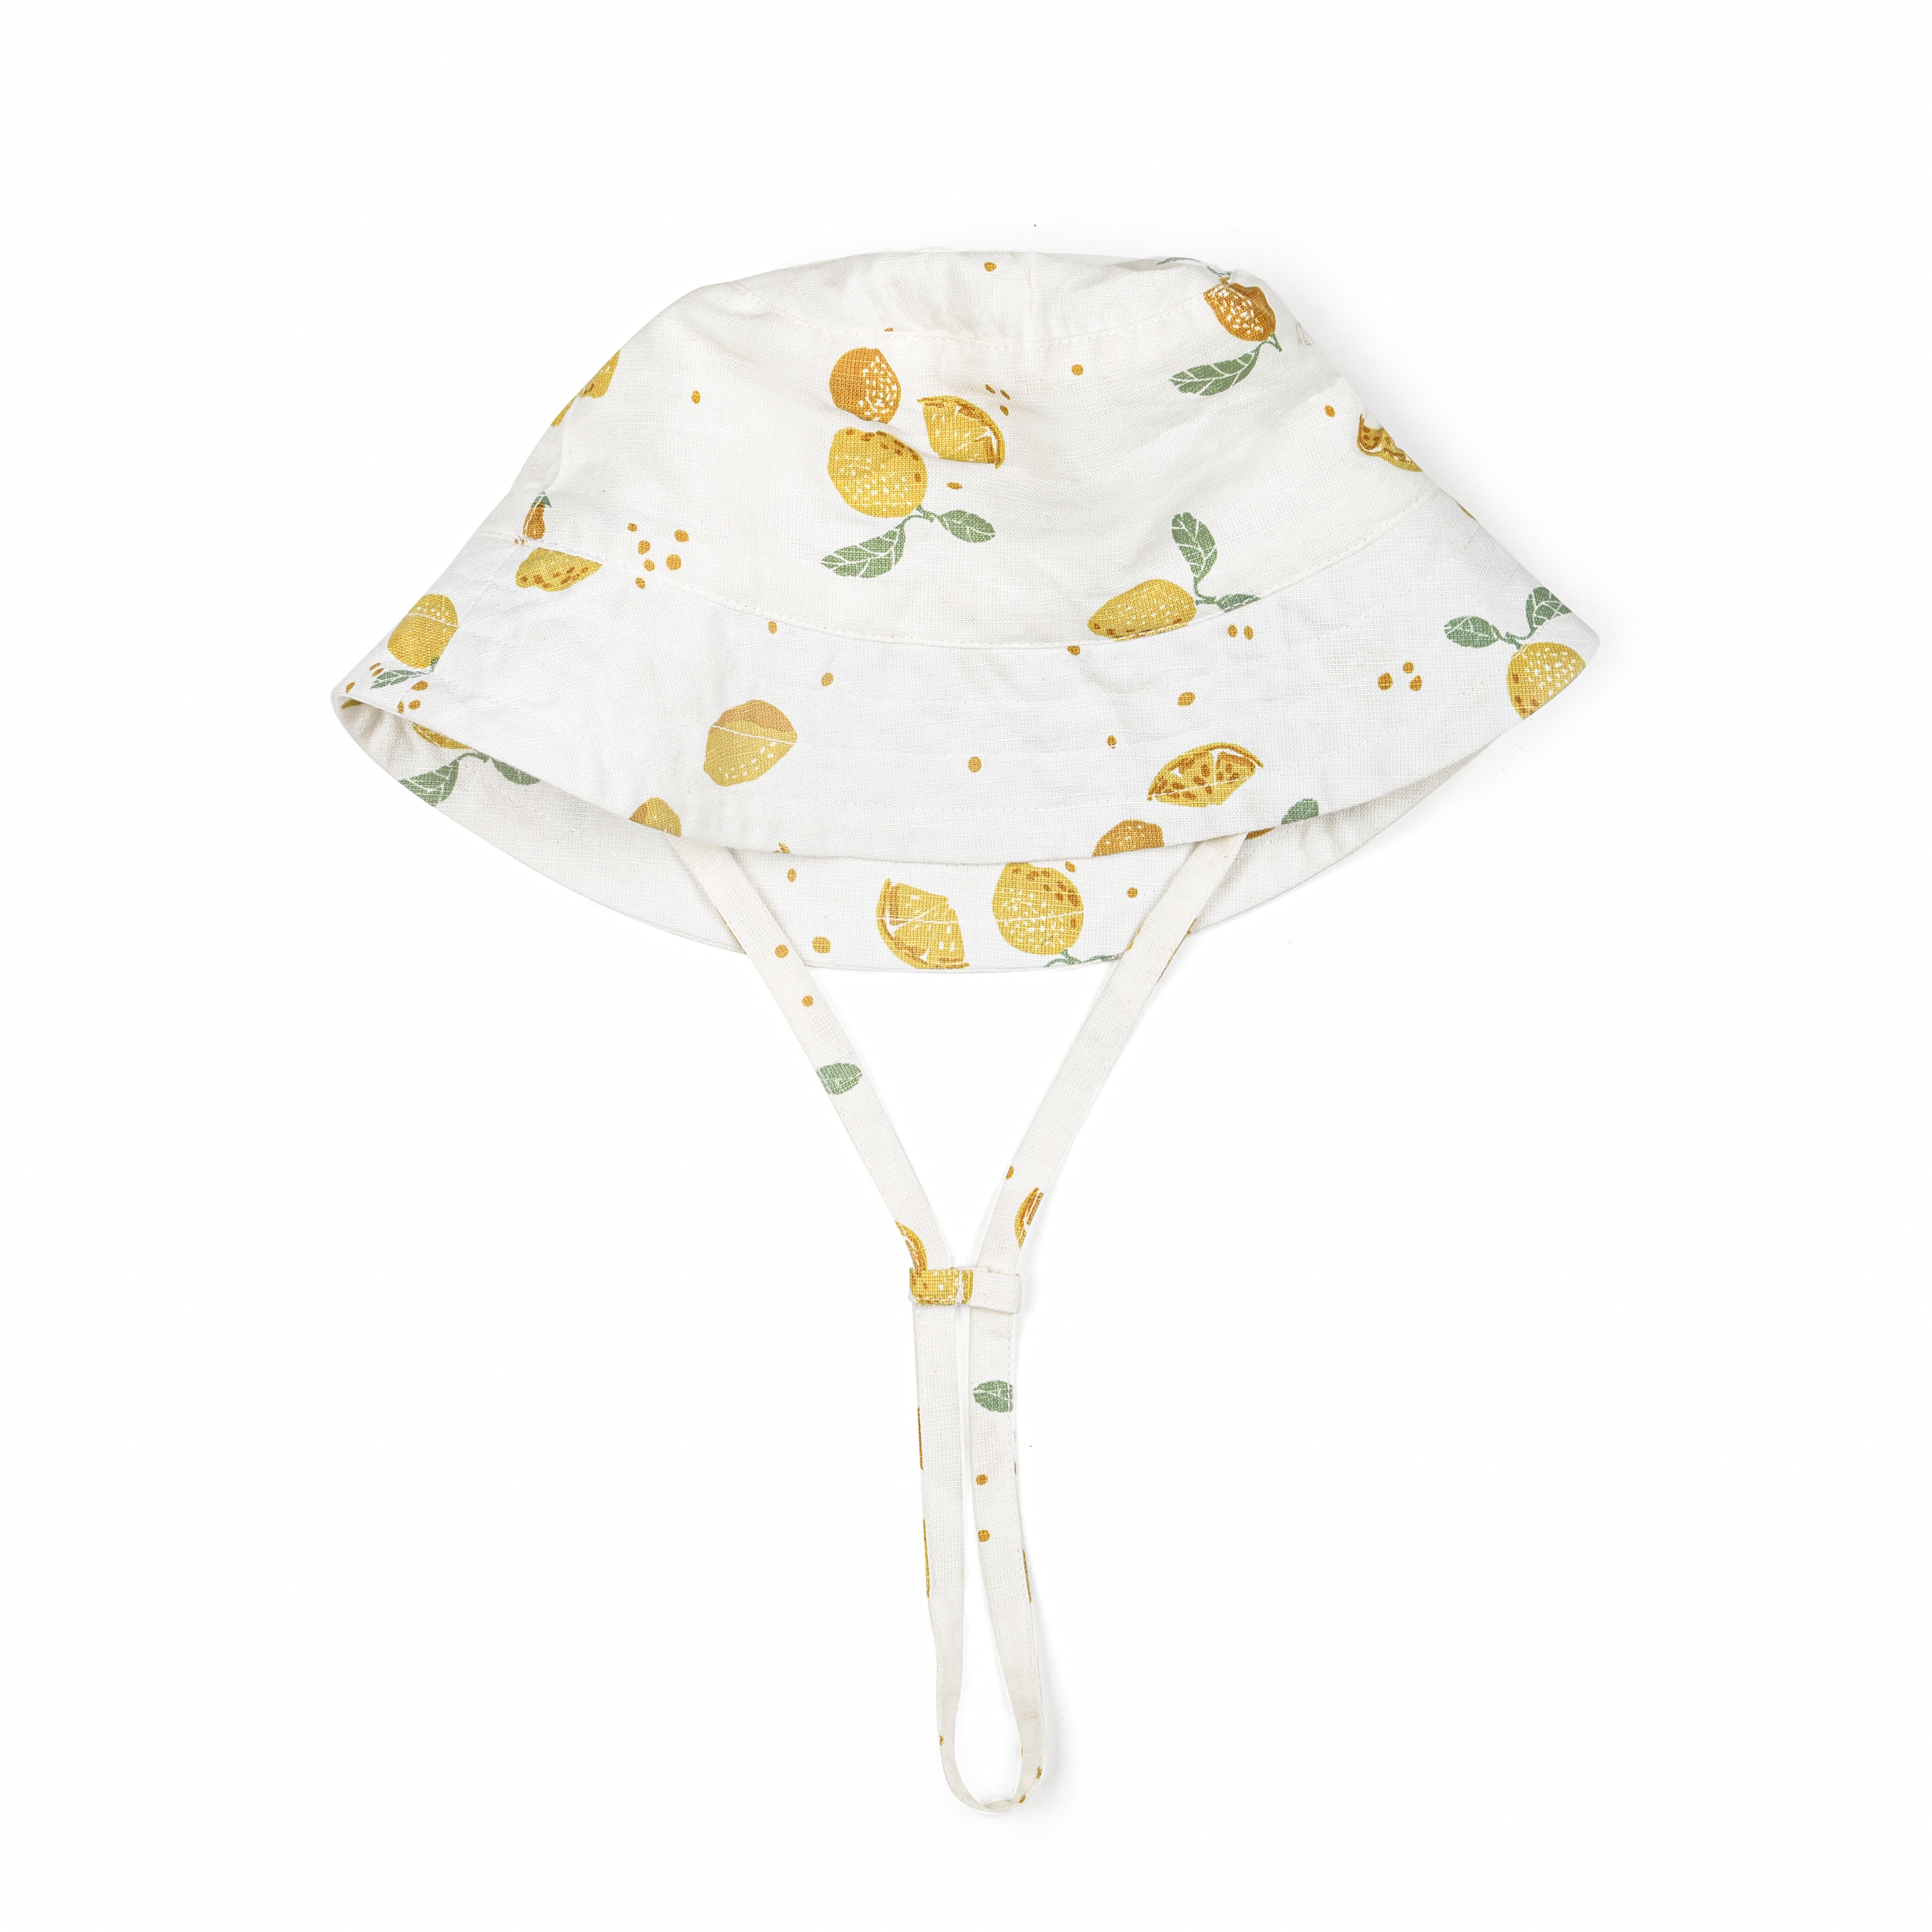 A white toddler sun hat adorned with a colorful lemon and leaves print, featuring a wide brim and two chin straps, isolated on a white background. The Organic Linen Bucket Sun Hat - Citron by Makemake Organics.